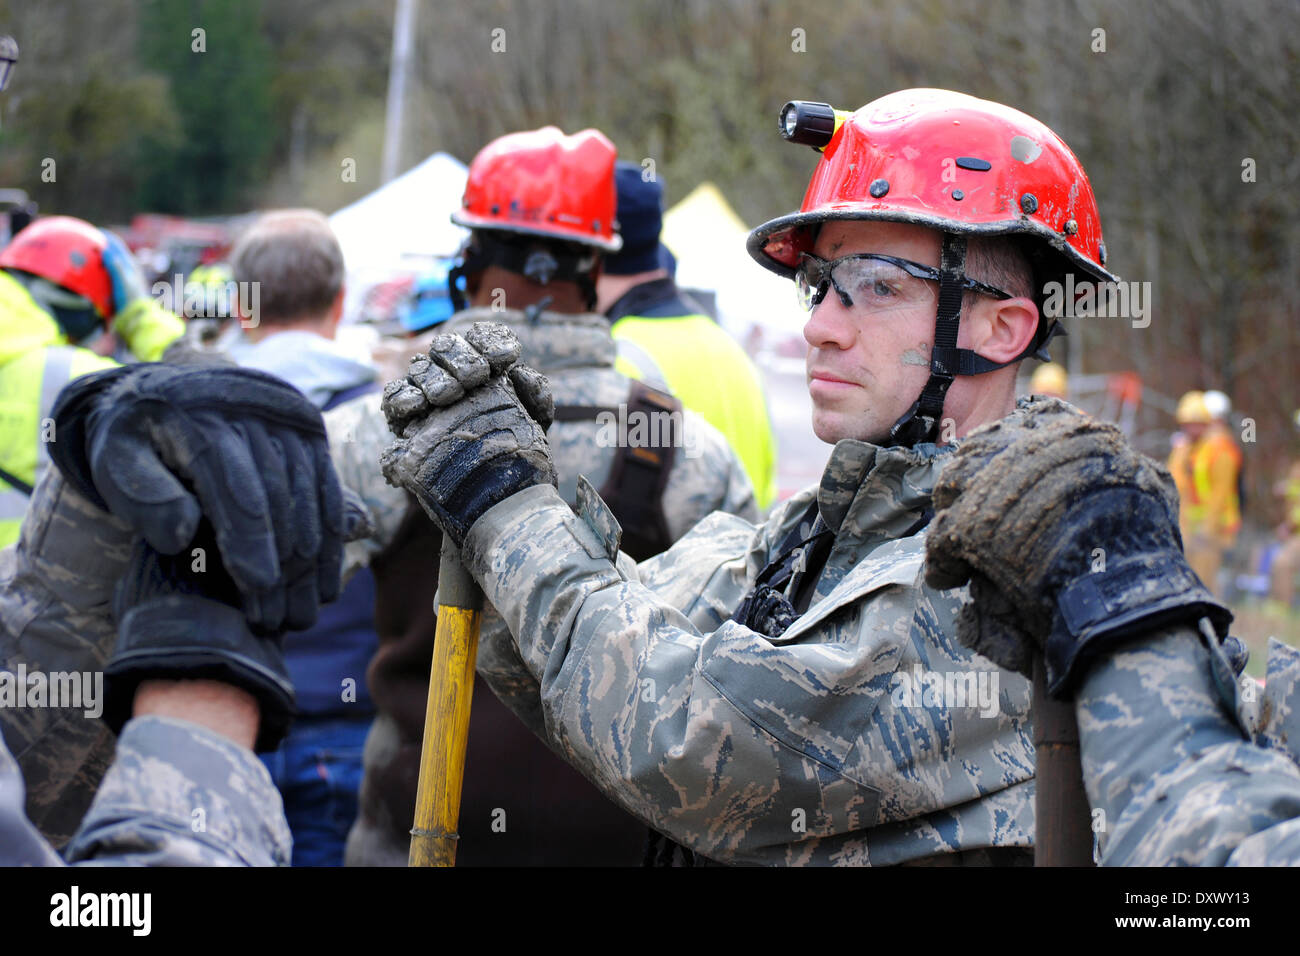 Rescue workers continue efforts to locate victims of a massive landslide that killed at least 28 people and destroyed a small riverside village in northwestern Washington state March 27, 2014 in Oso, Washington. Stock Photo